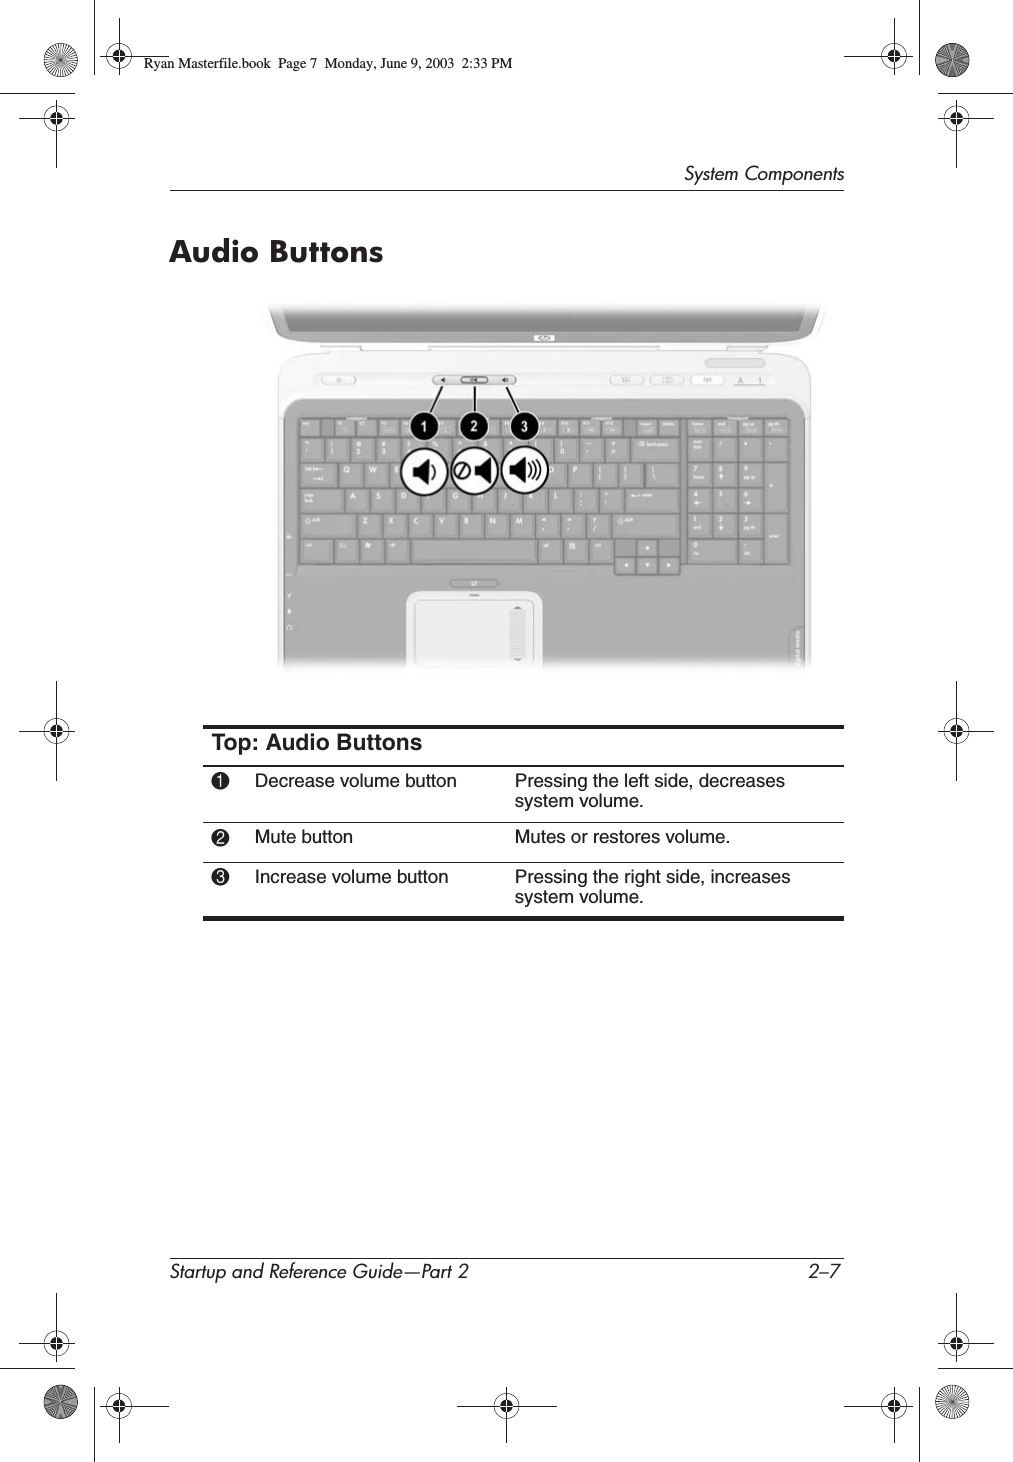 System ComponentsStartup and Reference Guide—Part 2 2–7Audio ButtonsTop: Audio Buttons1Decrease volume button Pressing the left side, decreases system volume.2Mute button Mutes or restores volume.3Increase volume button Pressing the right side, increases system volume.Ryan Masterfile.book  Page 7  Monday, June 9, 2003  2:33 PM